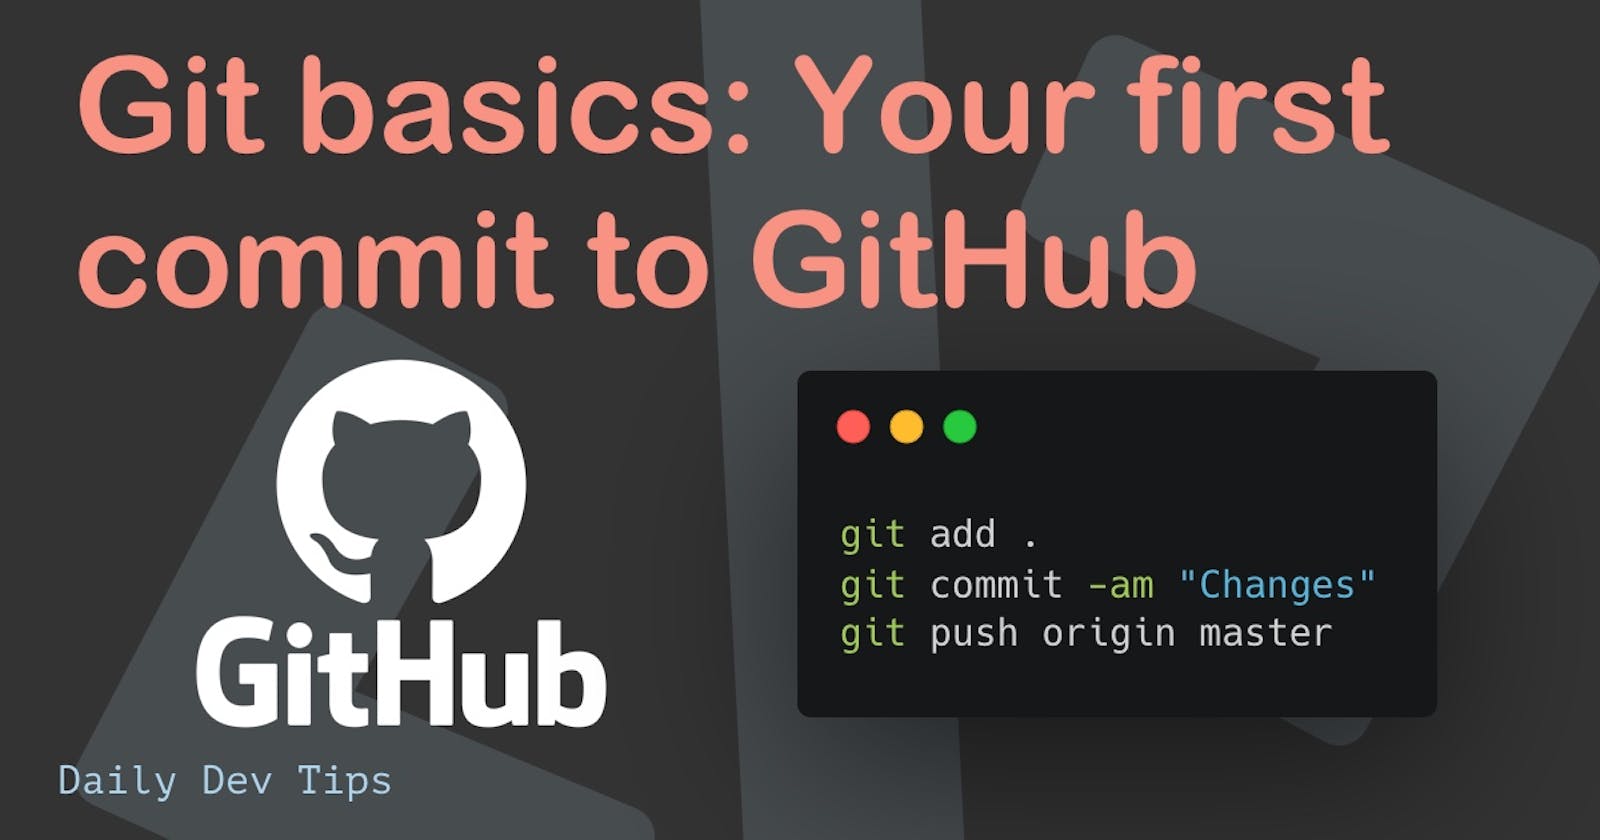 Git basics: Your first commit to GitHub